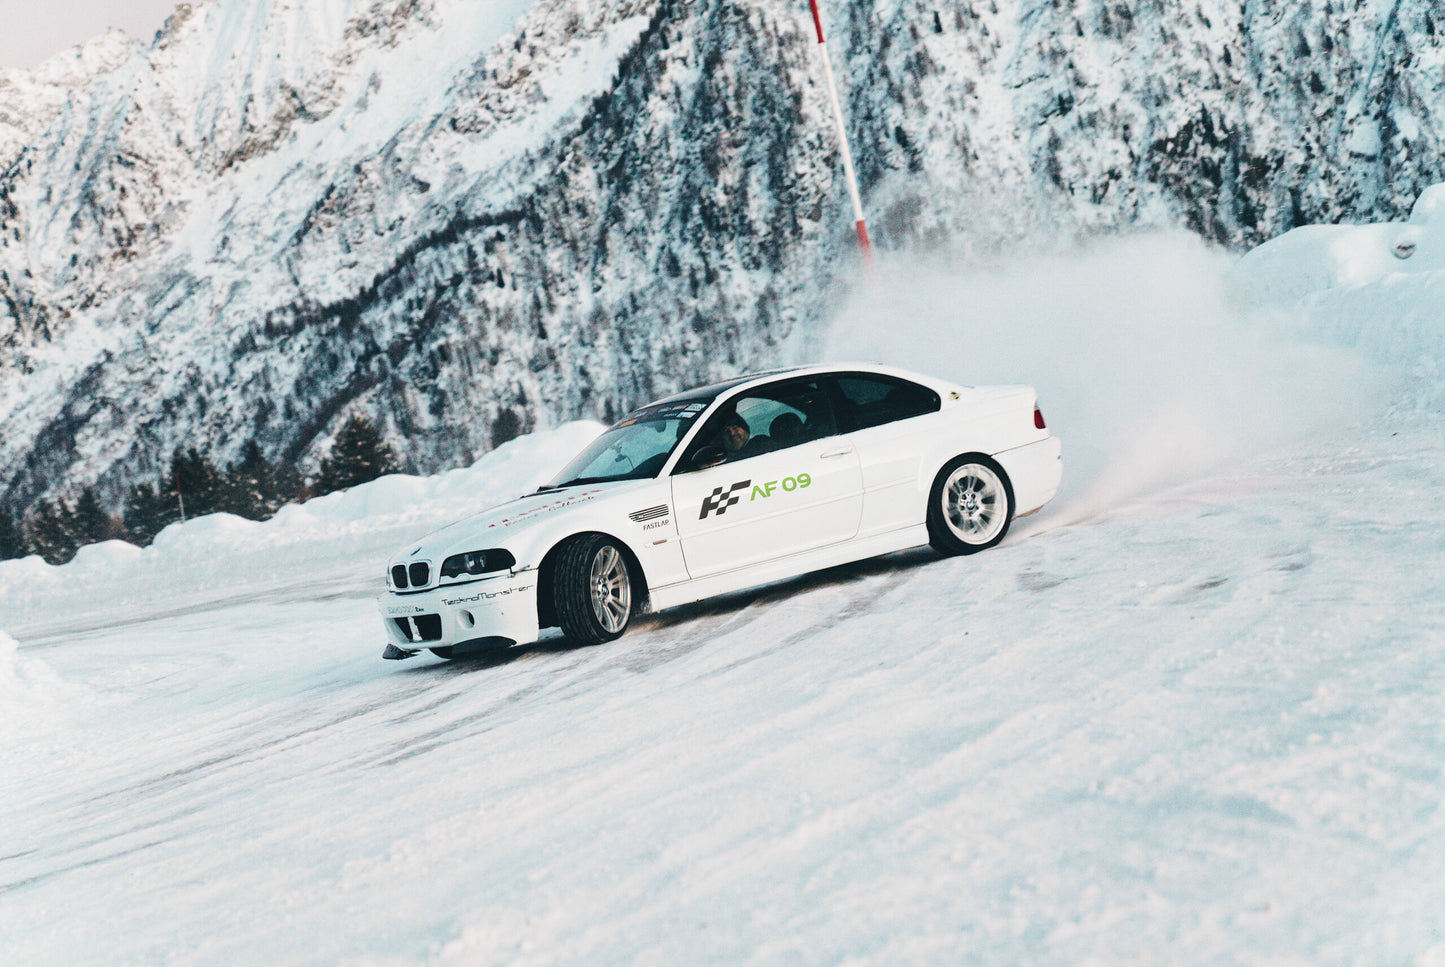 AF09 // ICE DRIVE COURSE